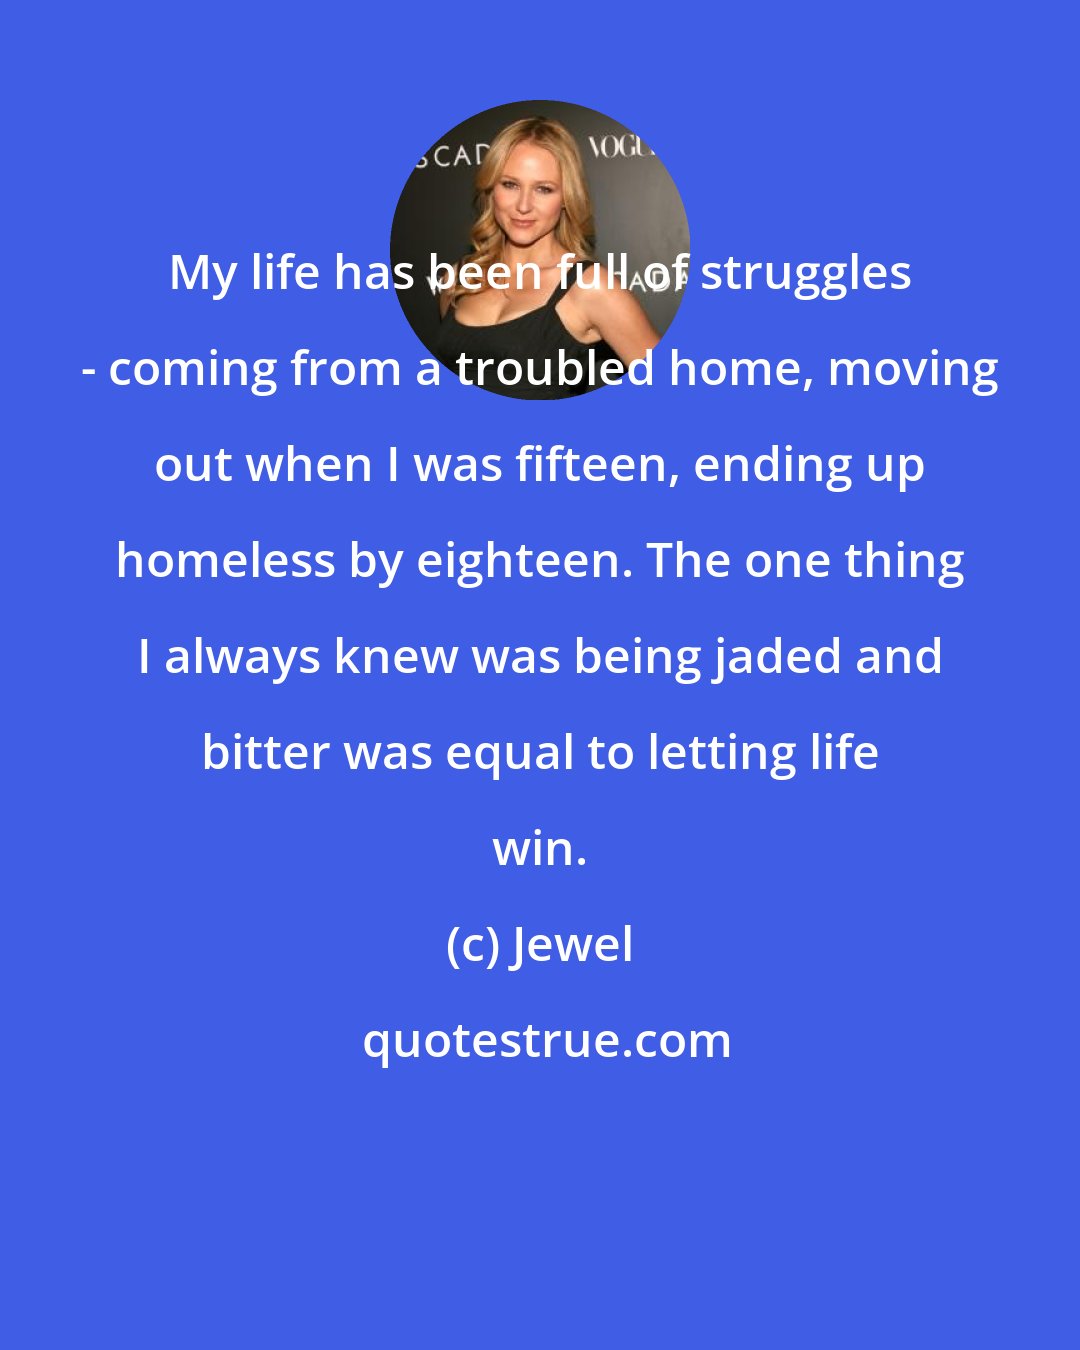 Jewel: My life has been full of struggles - coming from a troubled home, moving out when I was fifteen, ending up homeless by eighteen. The one thing I always knew was being jaded and bitter was equal to letting life win.